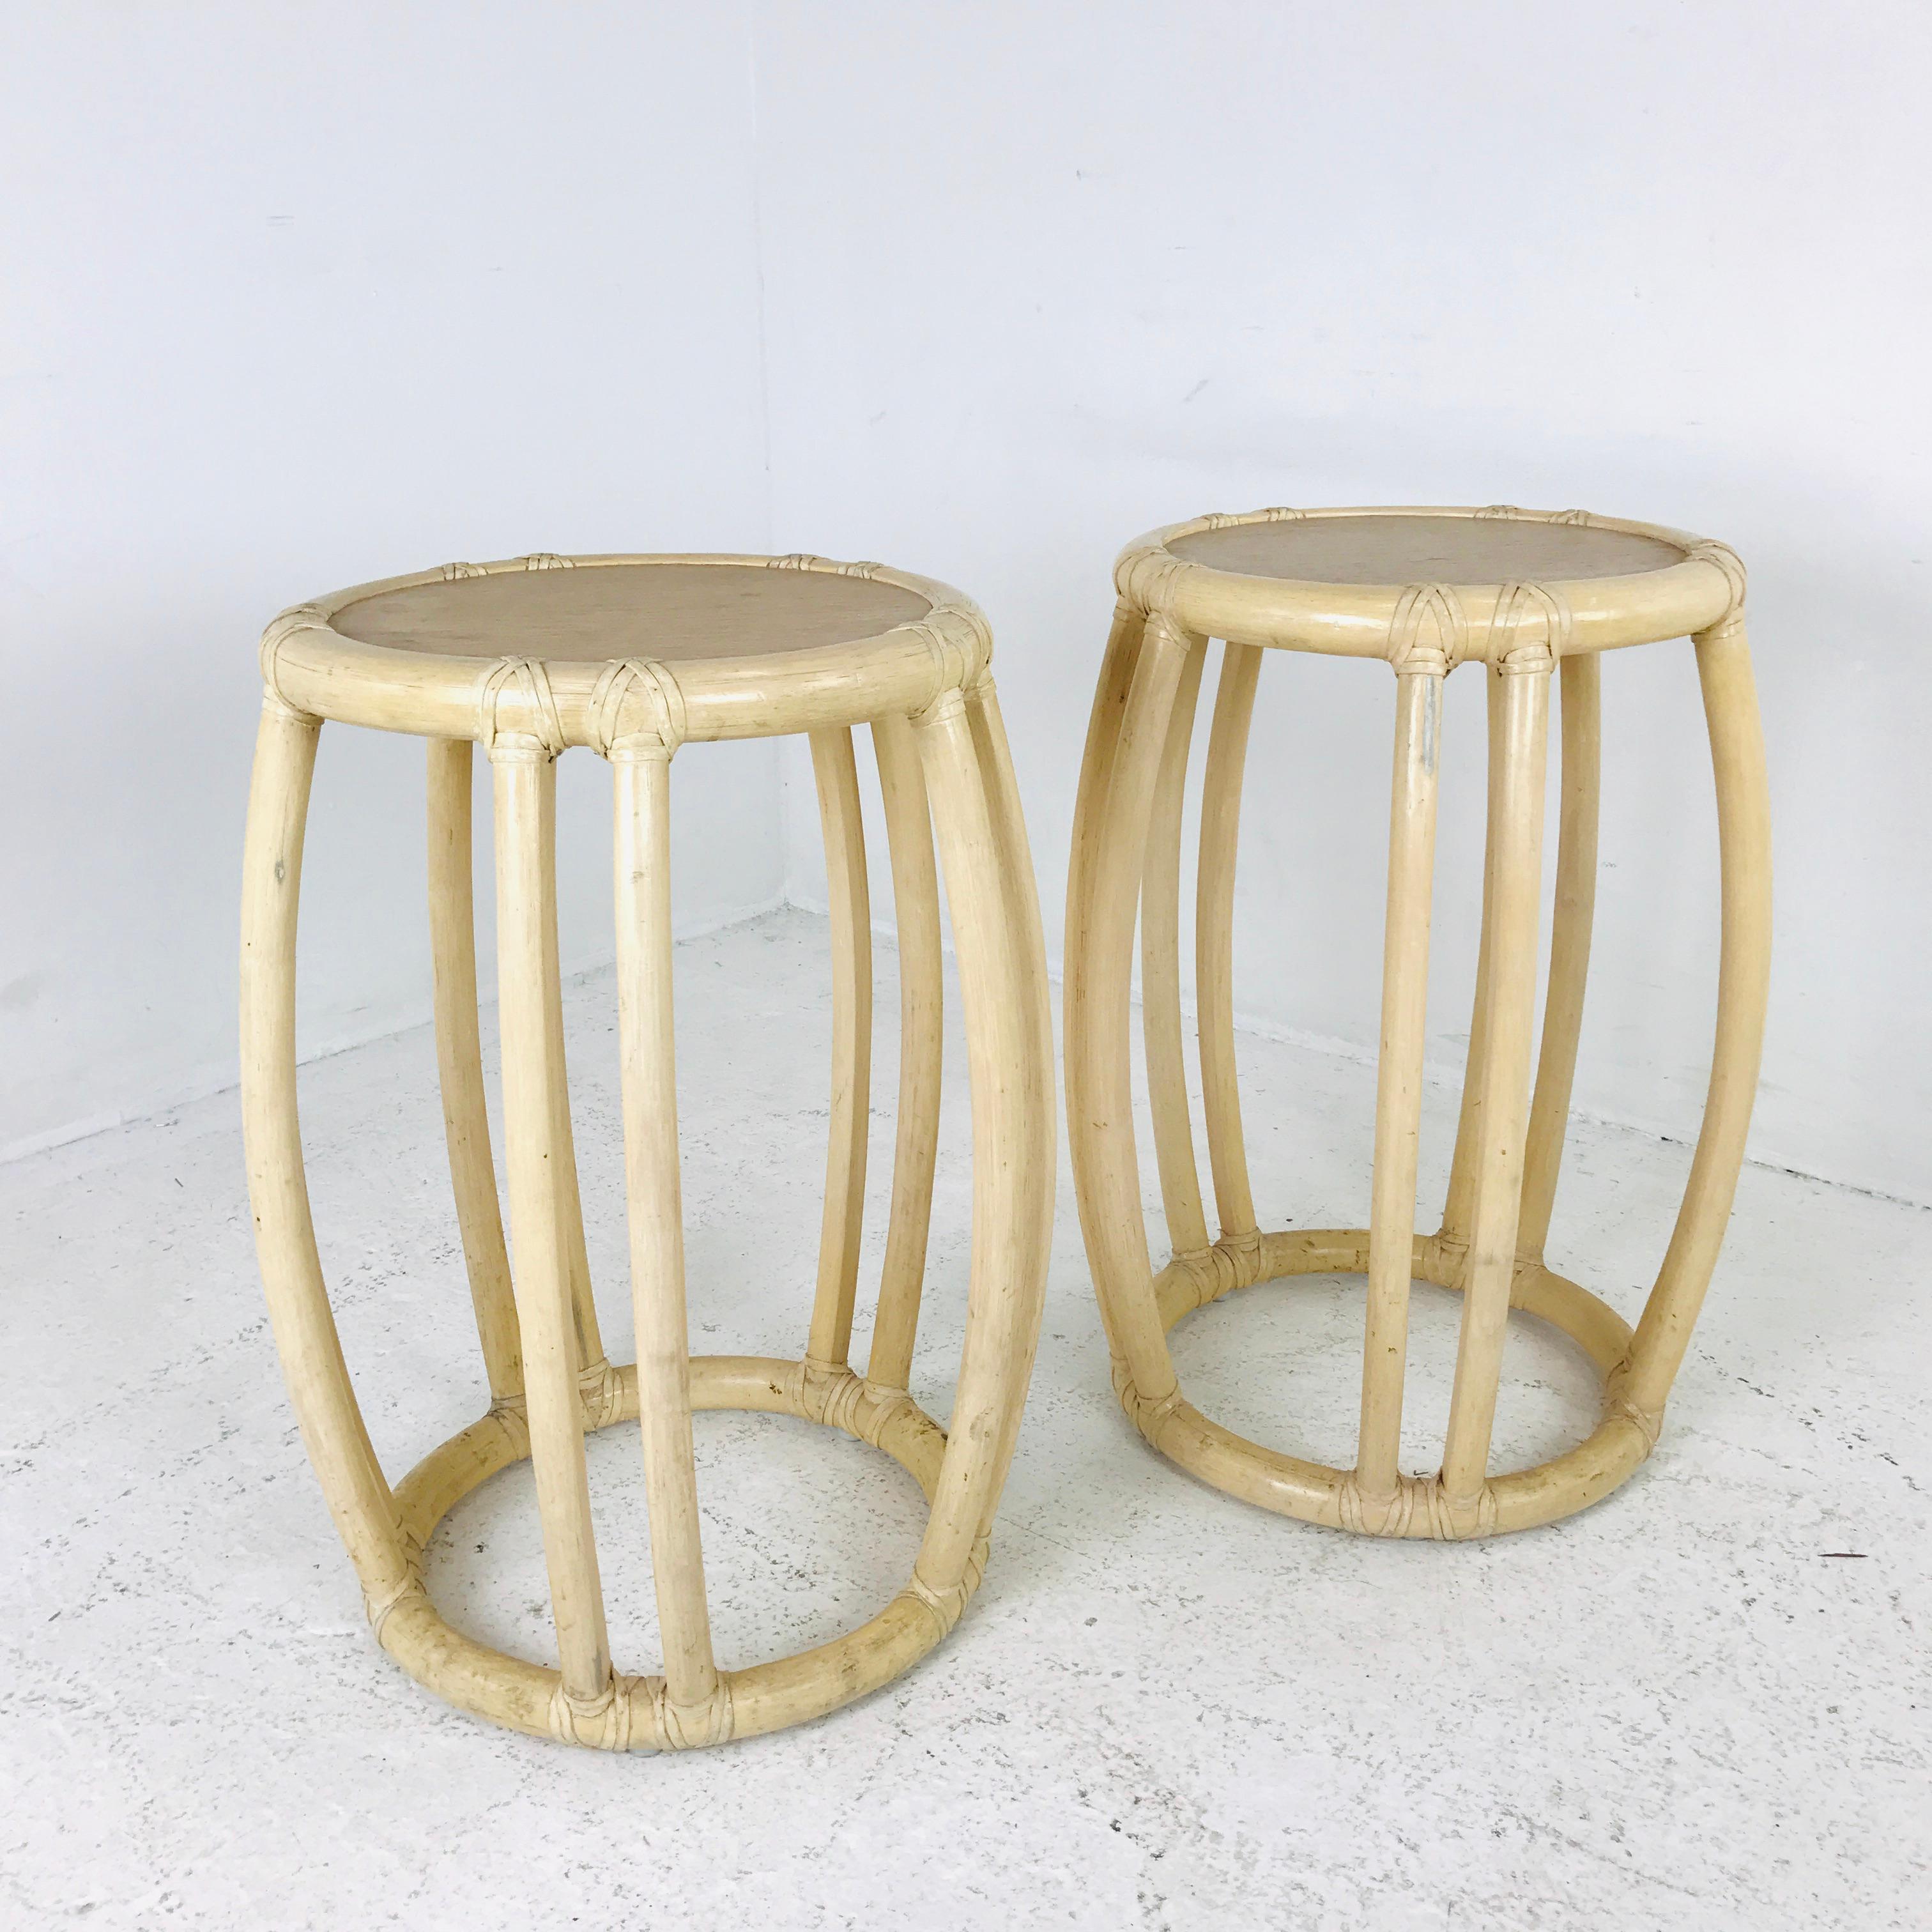 A pair of beautiful bamboo and rattan trimmed drum side tables/stools. Diameter of top measures 15